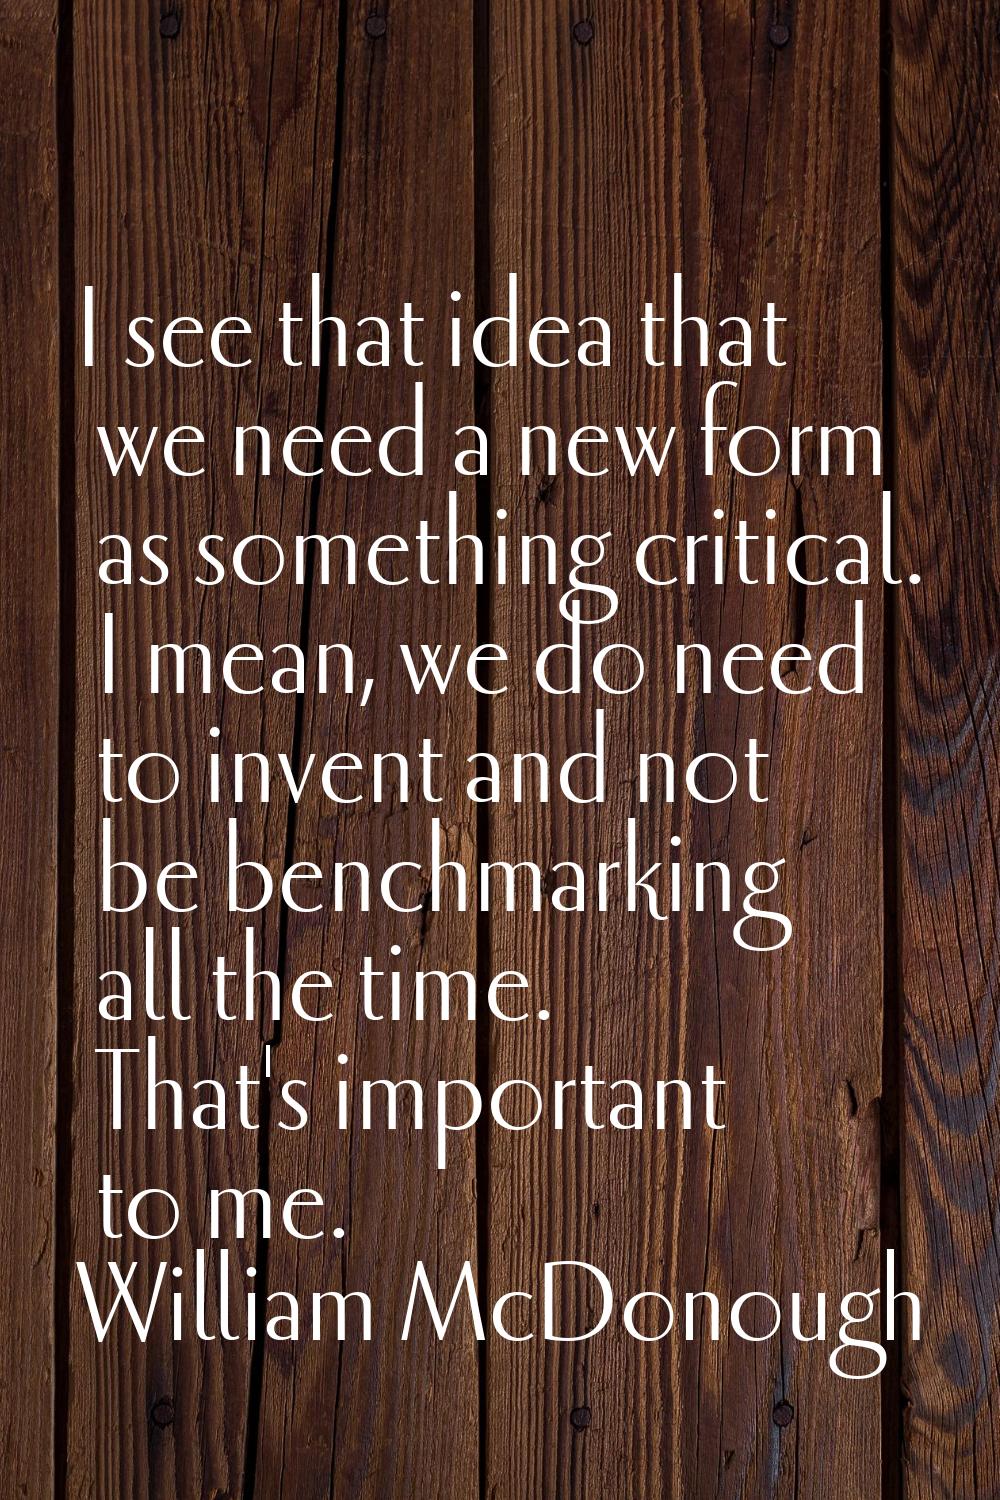 I see that idea that we need a new form as something critical. I mean, we do need to invent and not